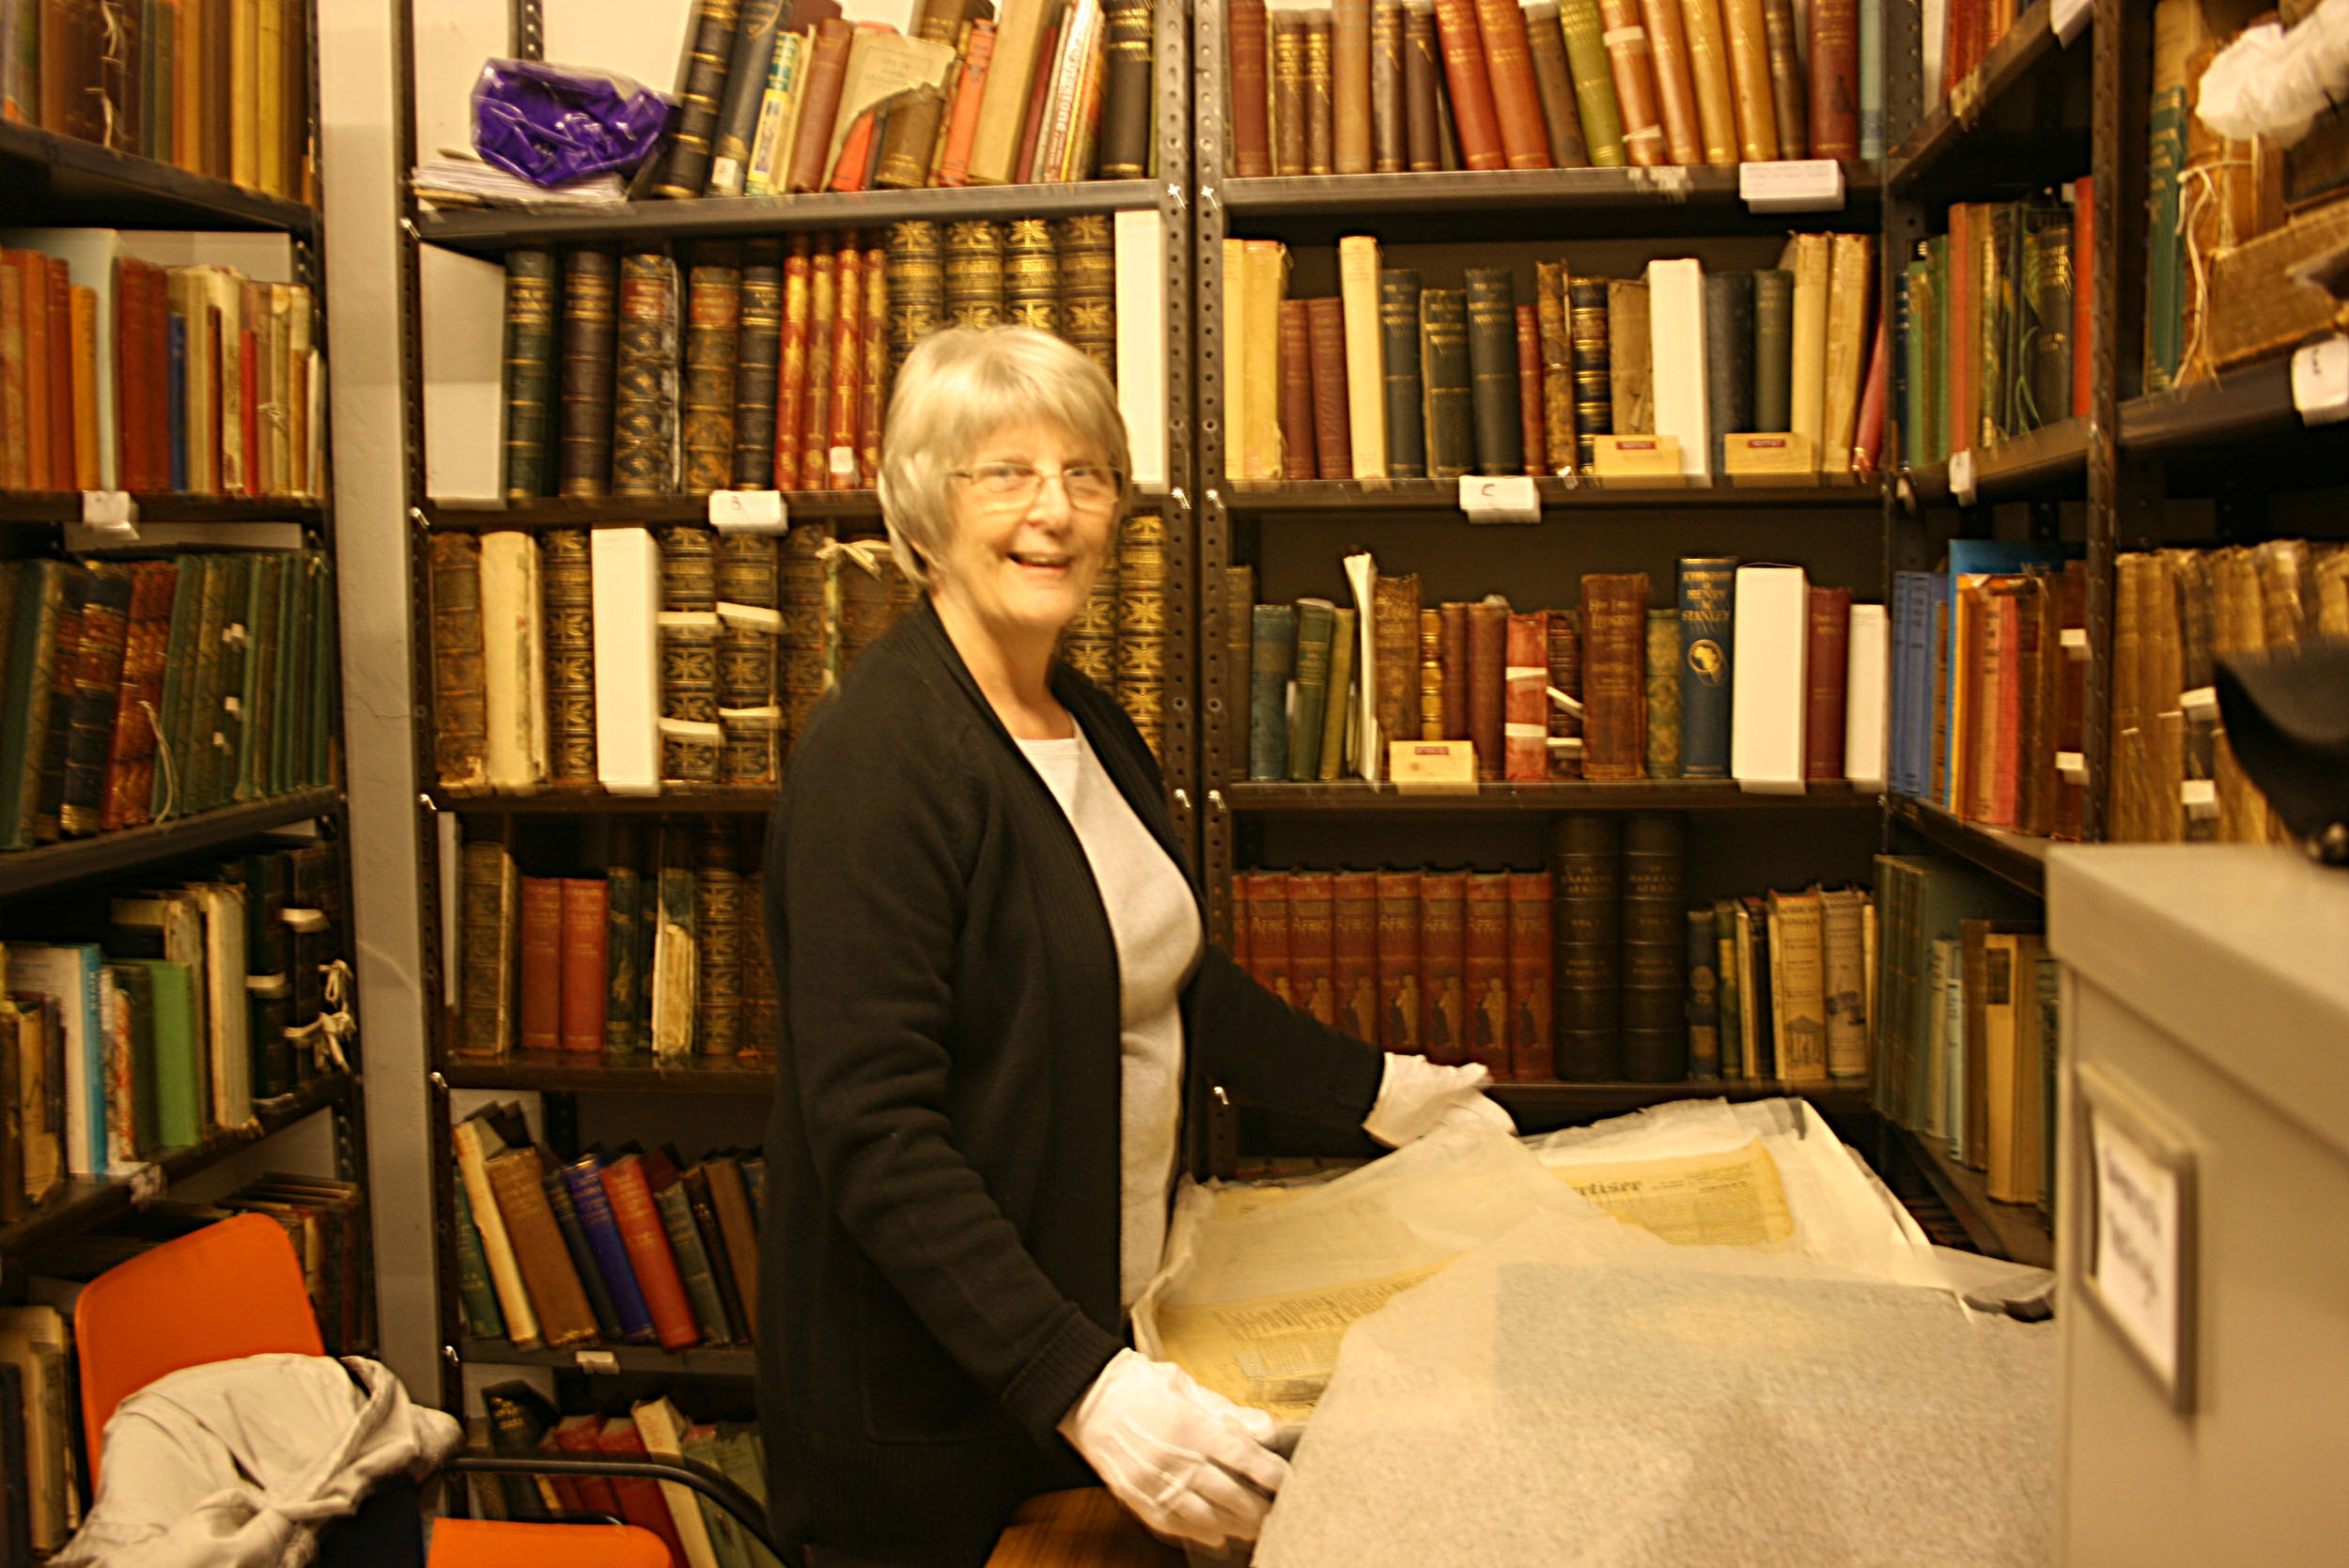 Anne Martin with the 1871 Field Diary in the David Livingstone Centre archives, 2011. Copyright Livingstone Spectral Imaging Project team. Creative Commons Attribution-NonCommercial 3.0 Unported (https://creativecommons.org/licenses/by-nc/3.0/).